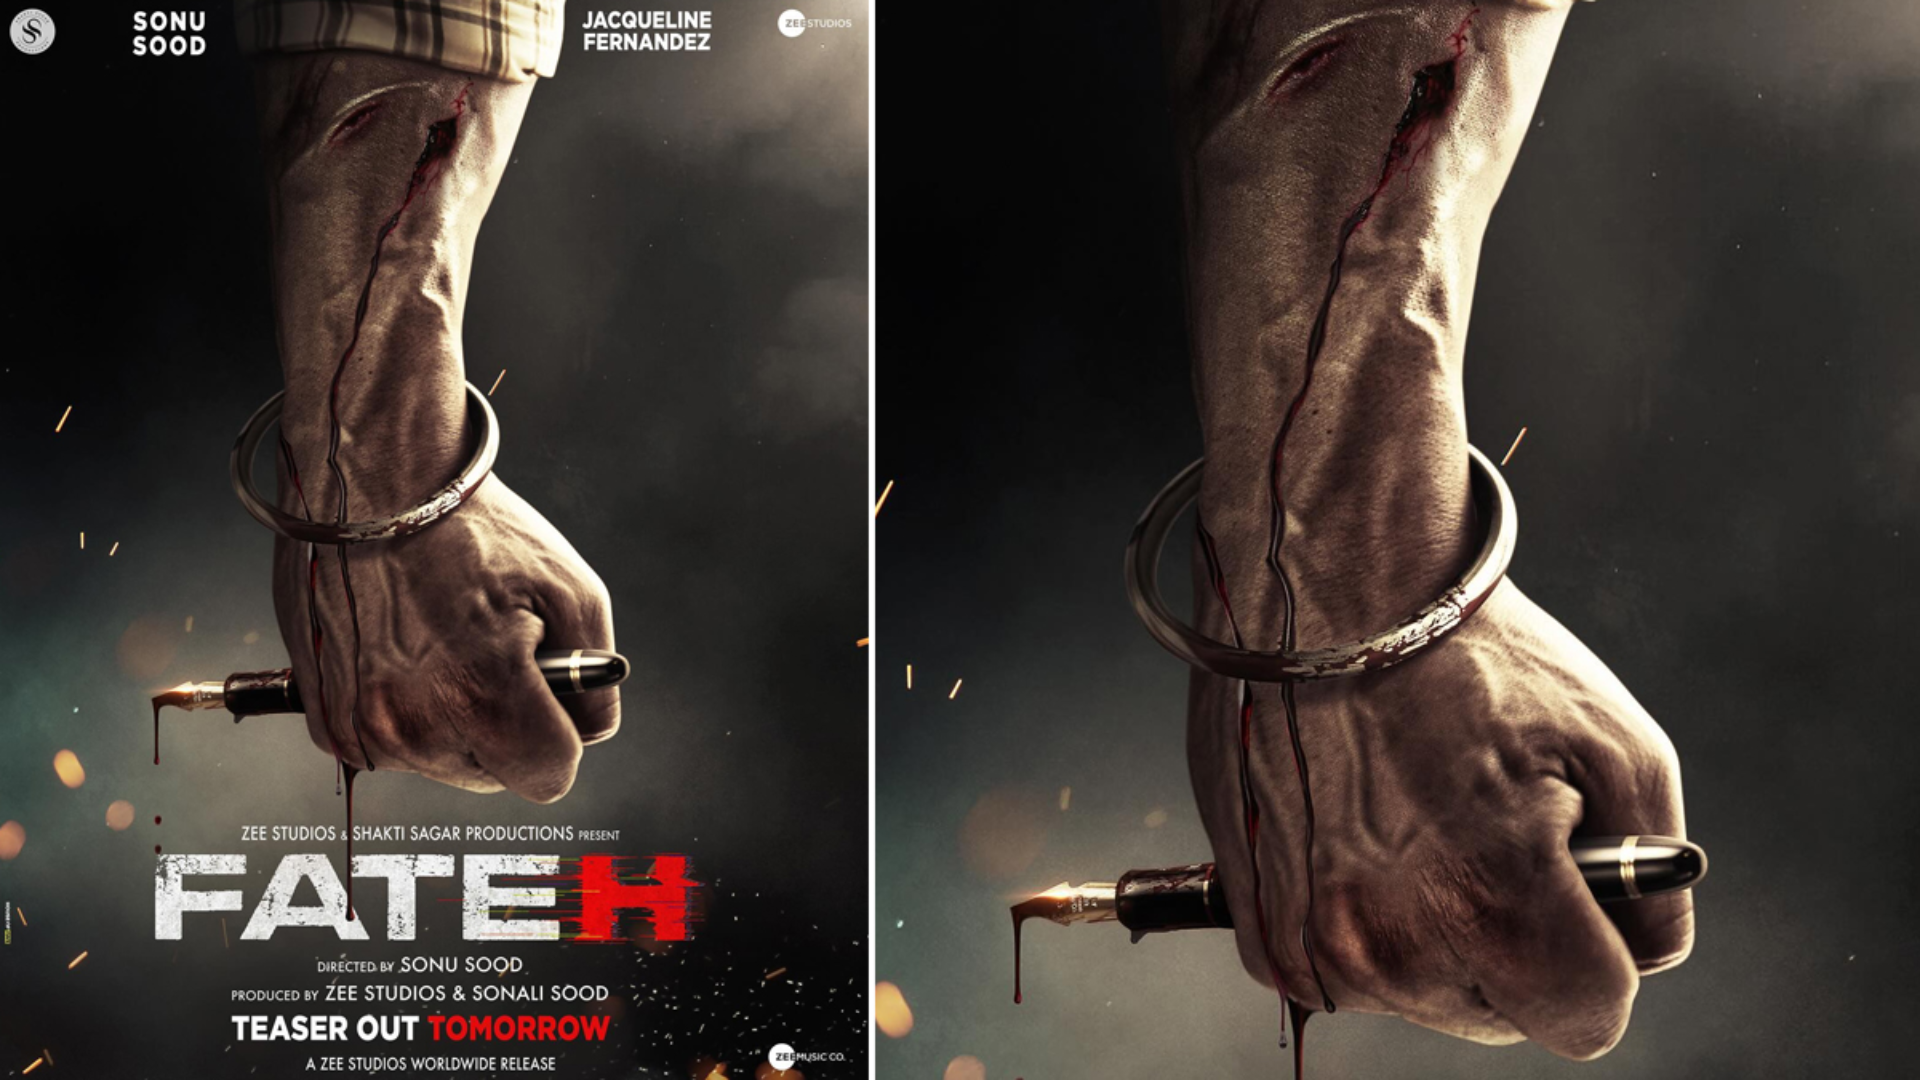 Sonu Sood Reveals ‘Fateh’ Poster, Teaser Set for Release on Saturday